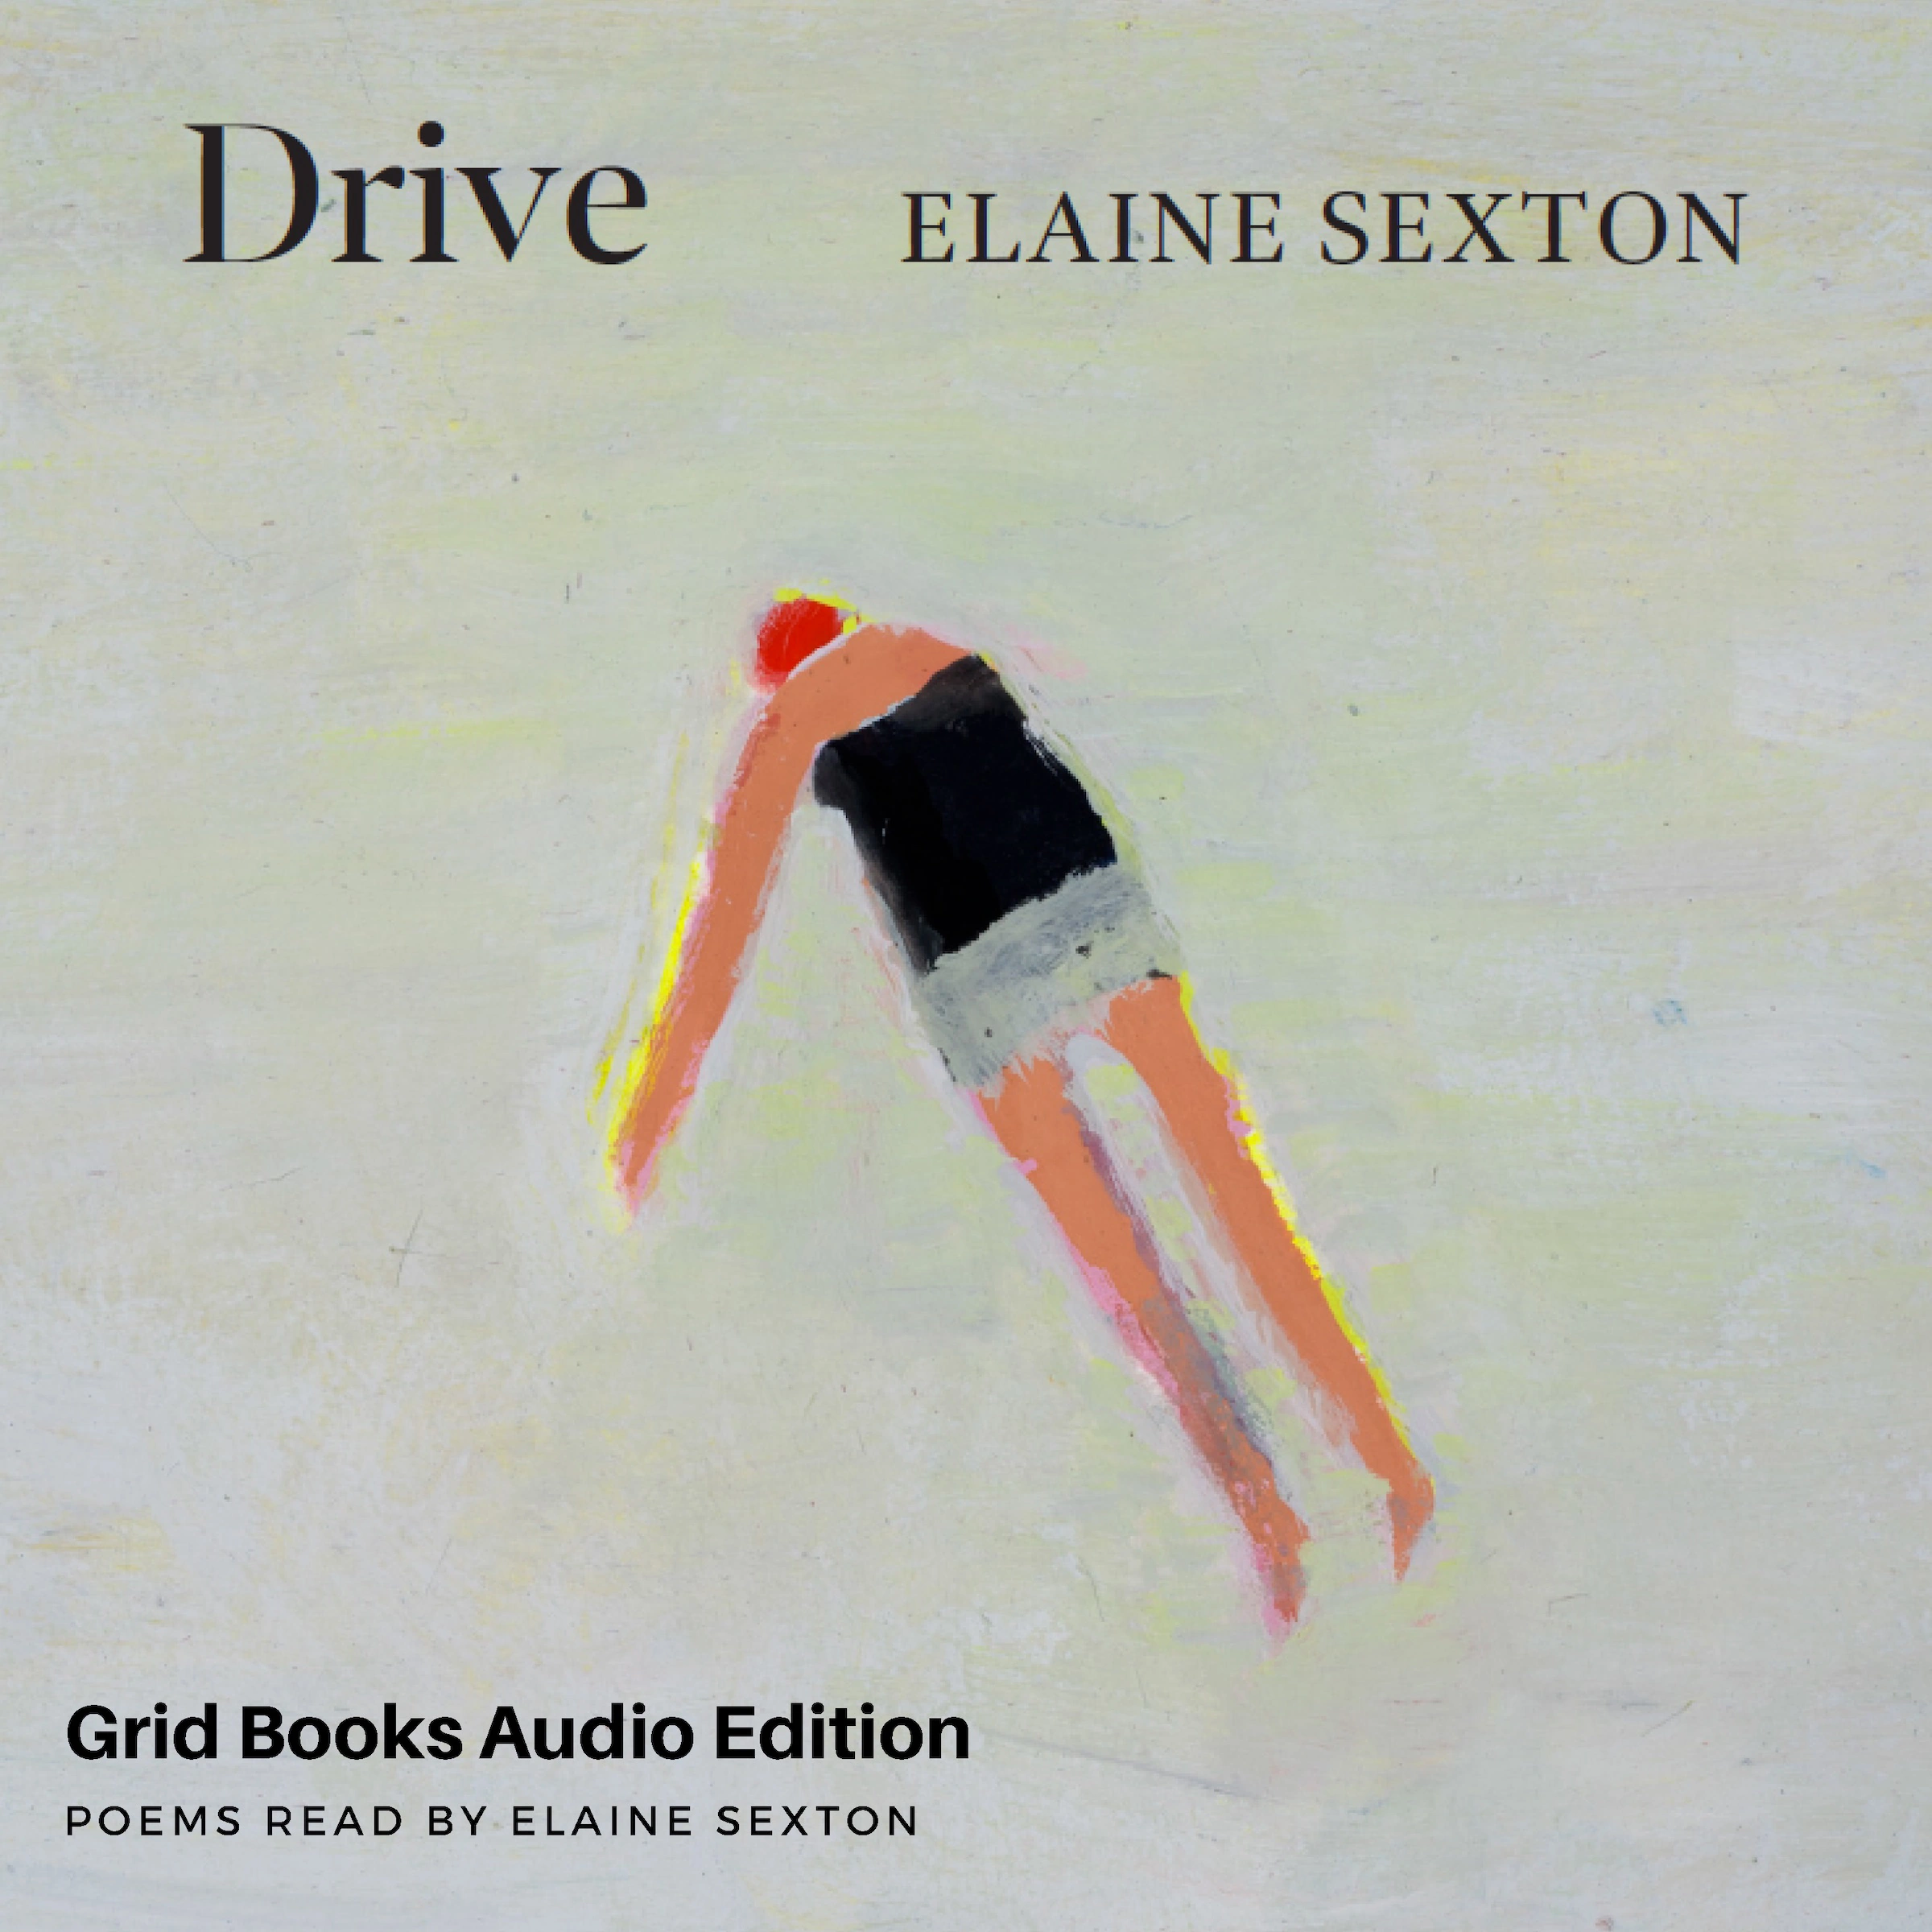 Drive by Elaine Sexton Audiobook